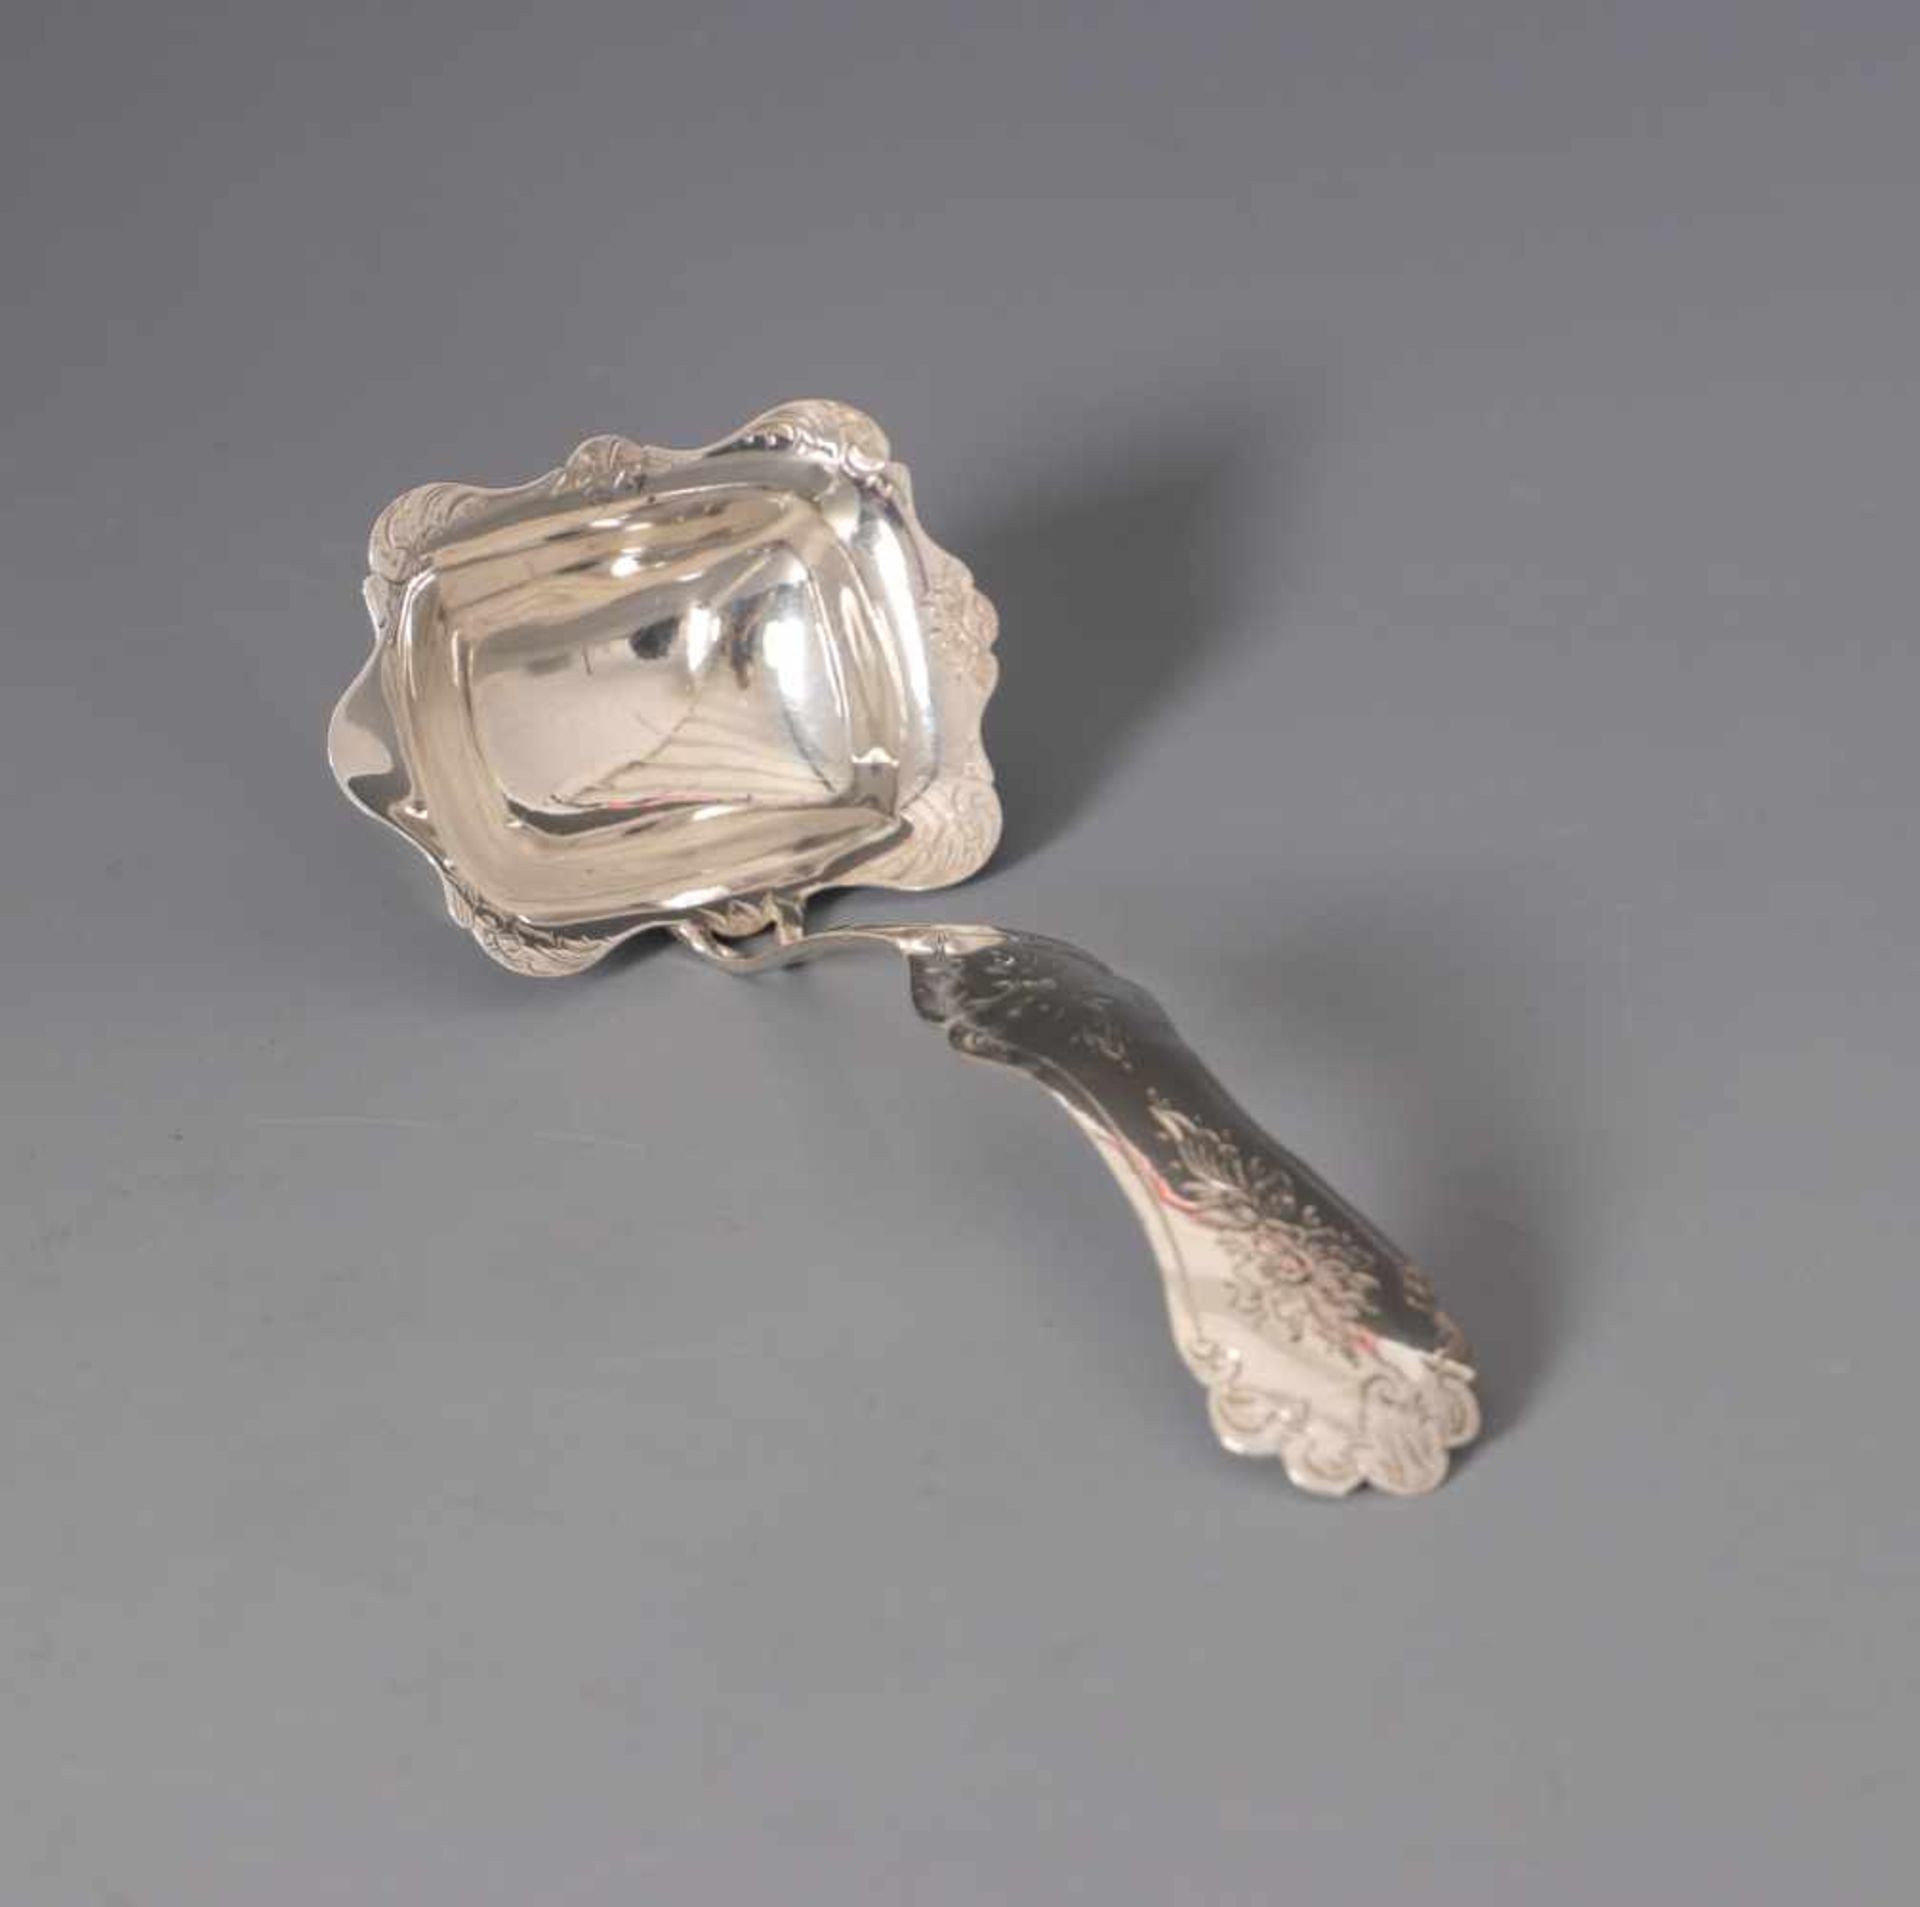 A Silver sauce ladle, dated 1856A Silver sauce ladle, dated 1856ZILVEREN SAUSLEPEL, AMSTERDAM,